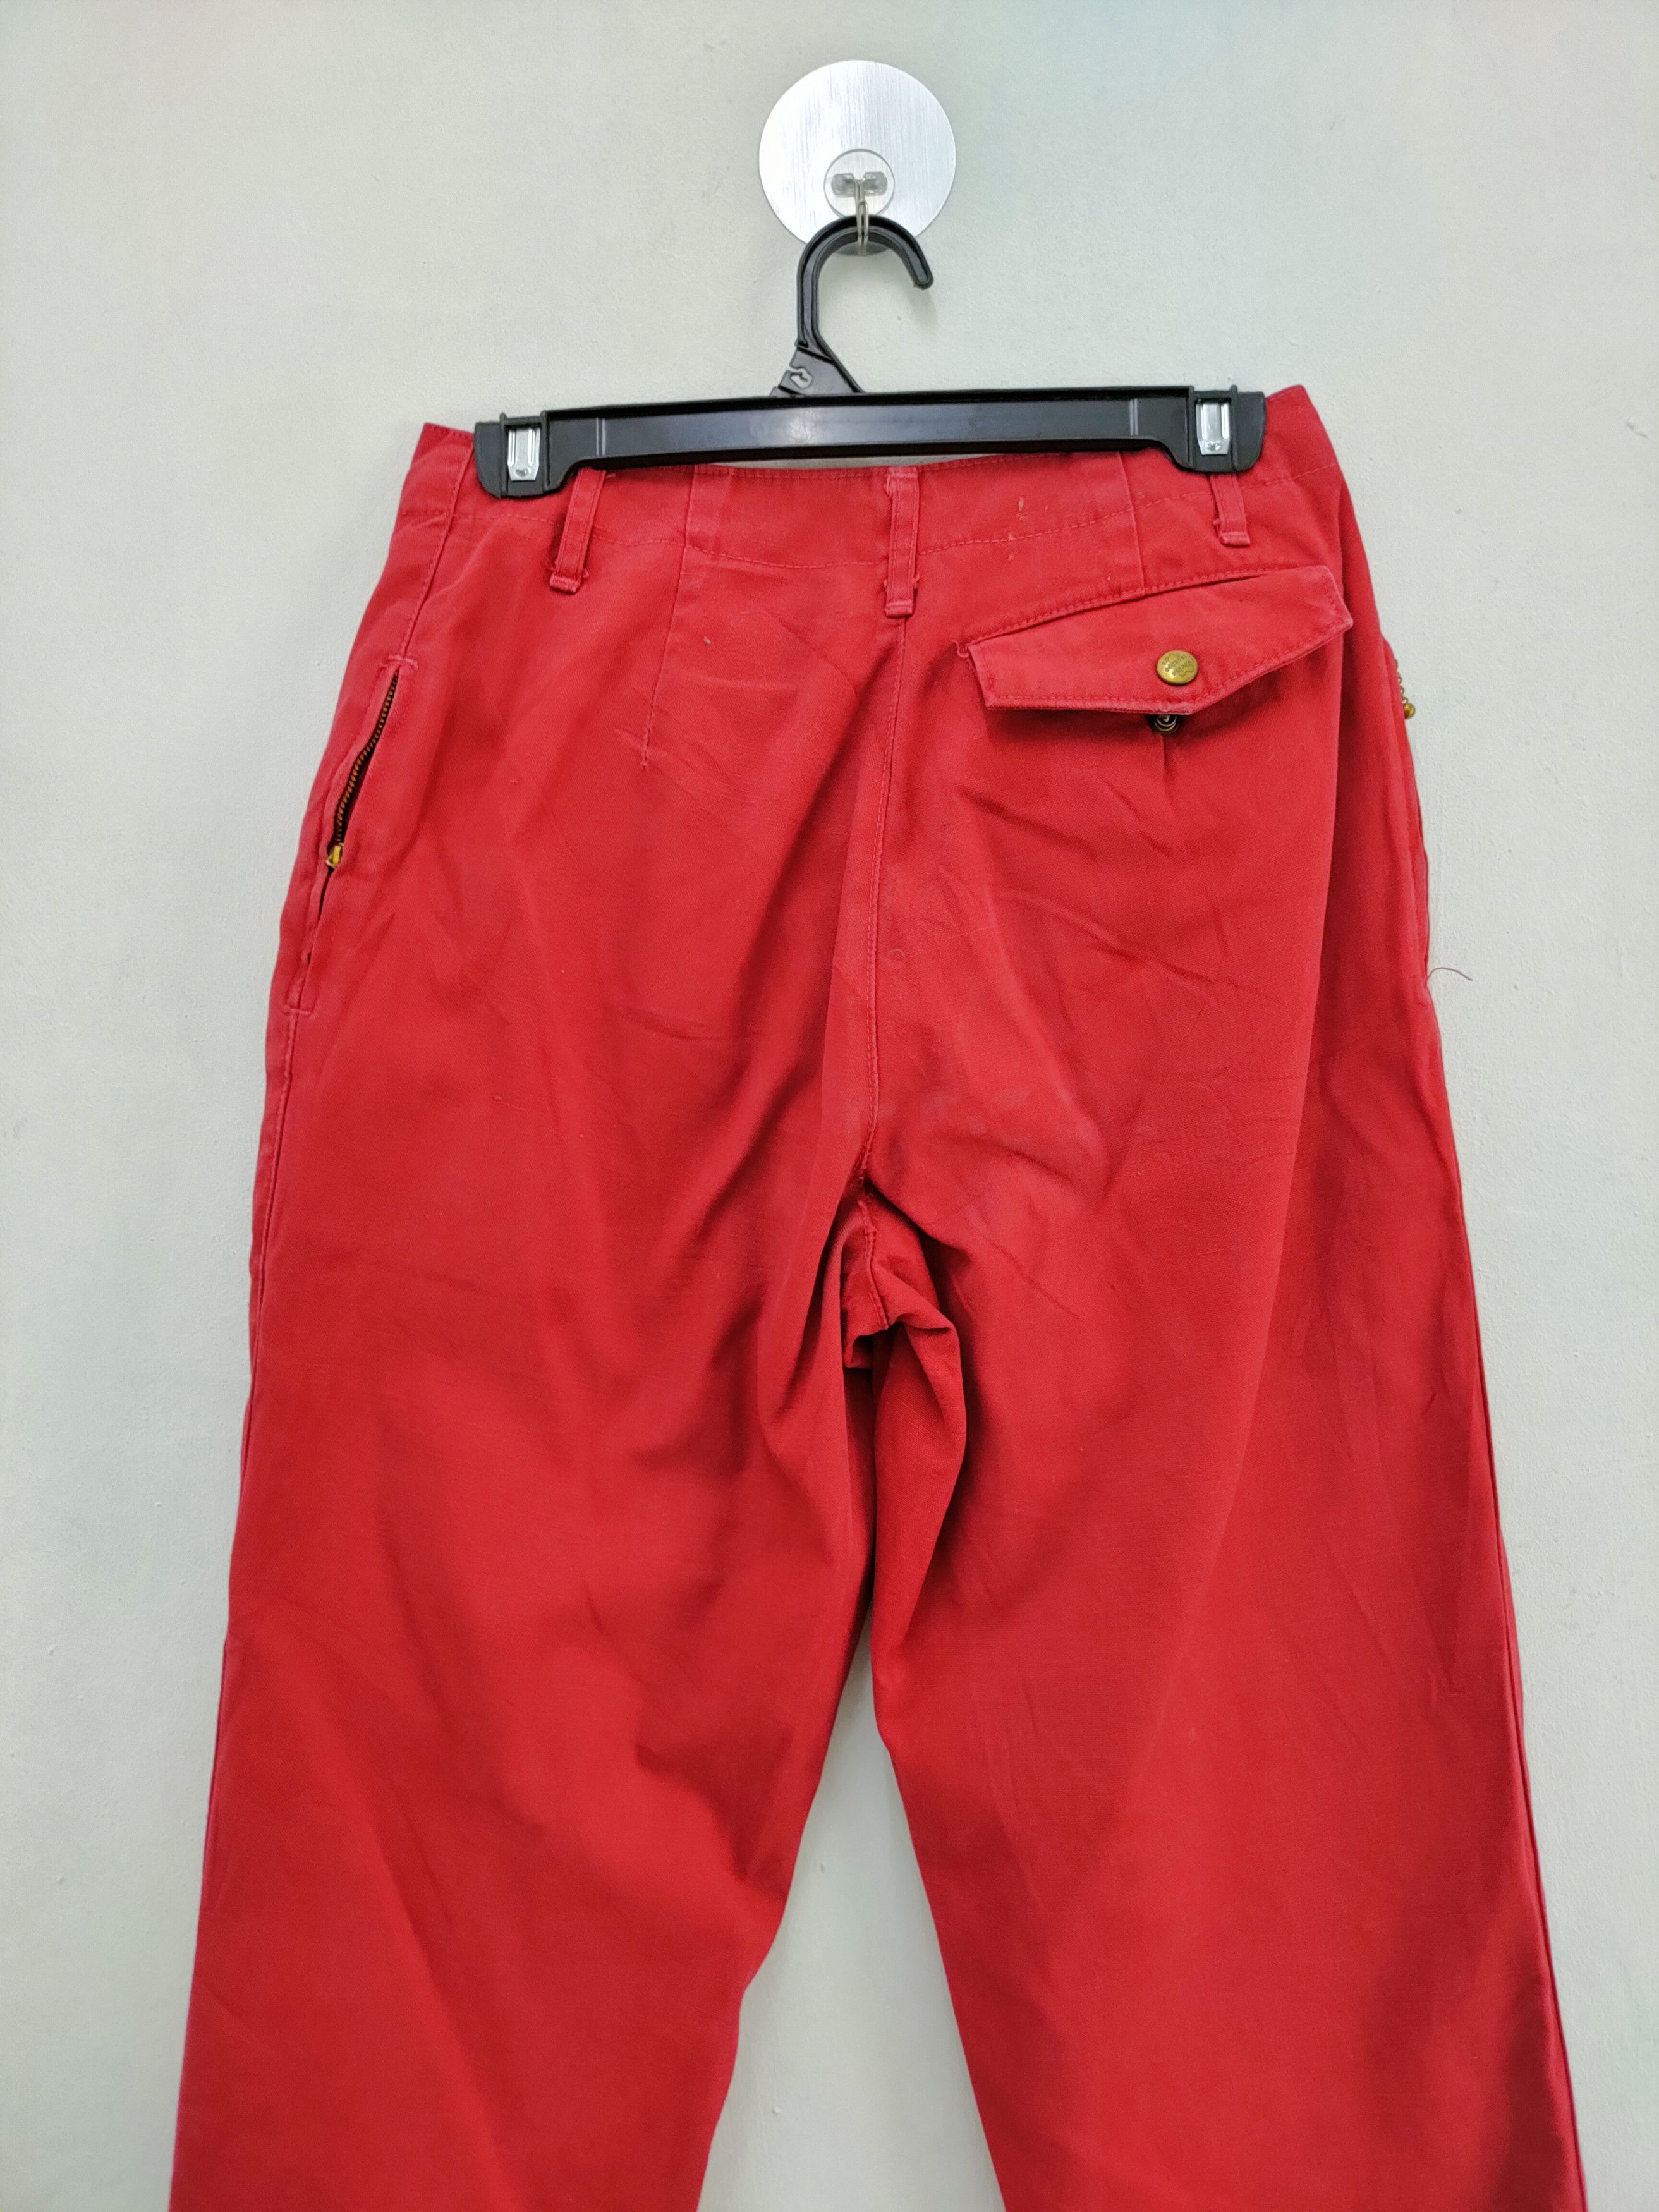 Linea Linea Vicenza Red Pants Made In Japan Size US 26 / EU 42 - 5 Thumbnail